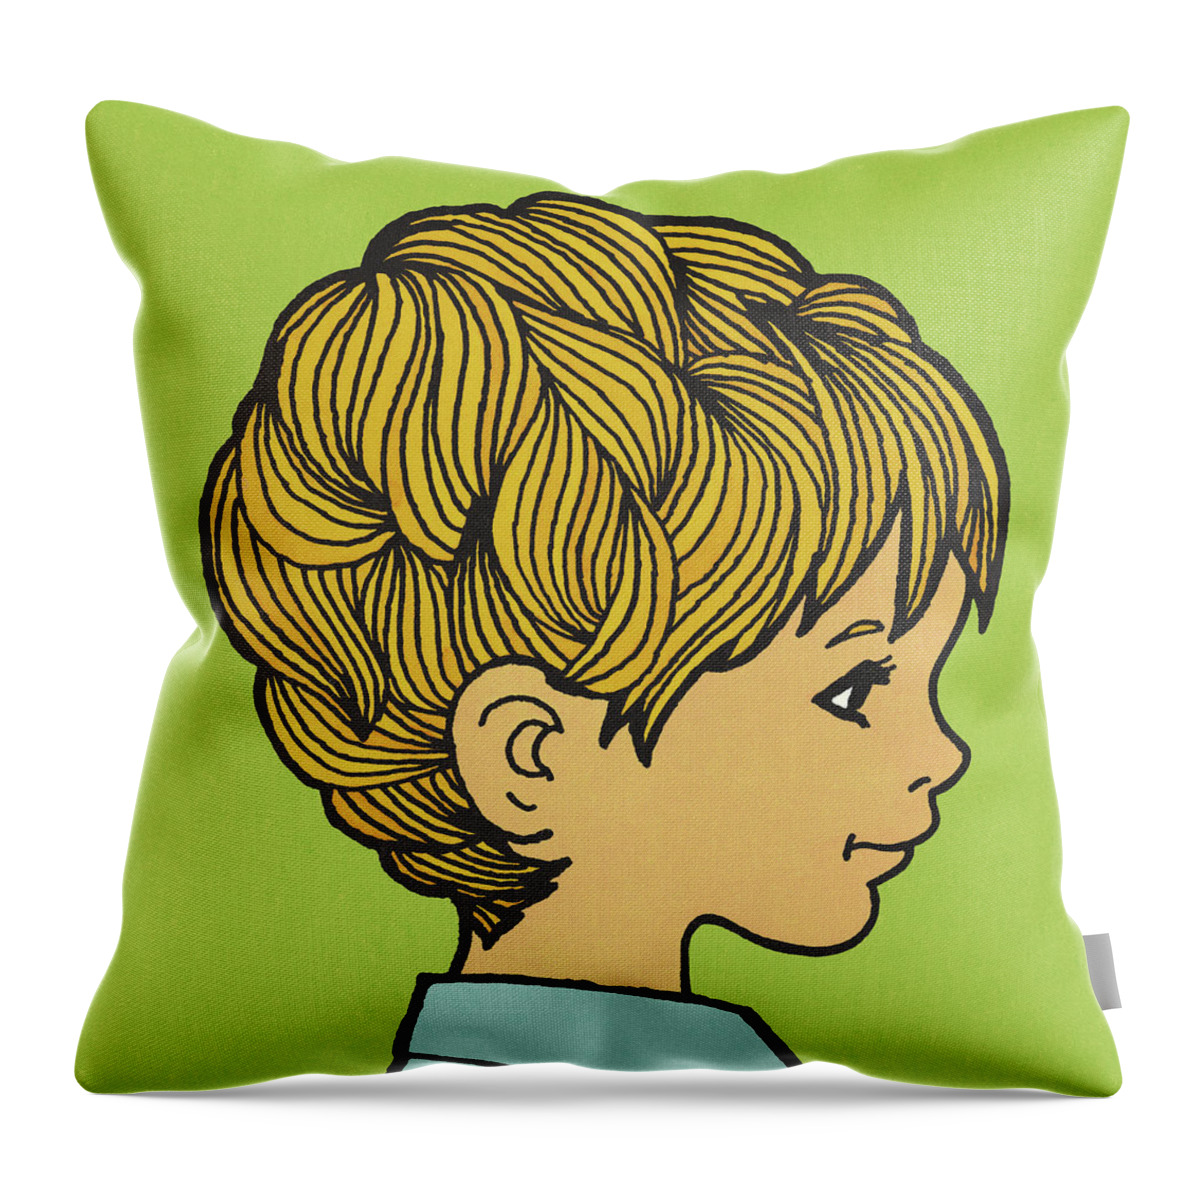 Adolescence Throw Pillow featuring the drawing Profile of a Boy with Blond Hair by CSA Images